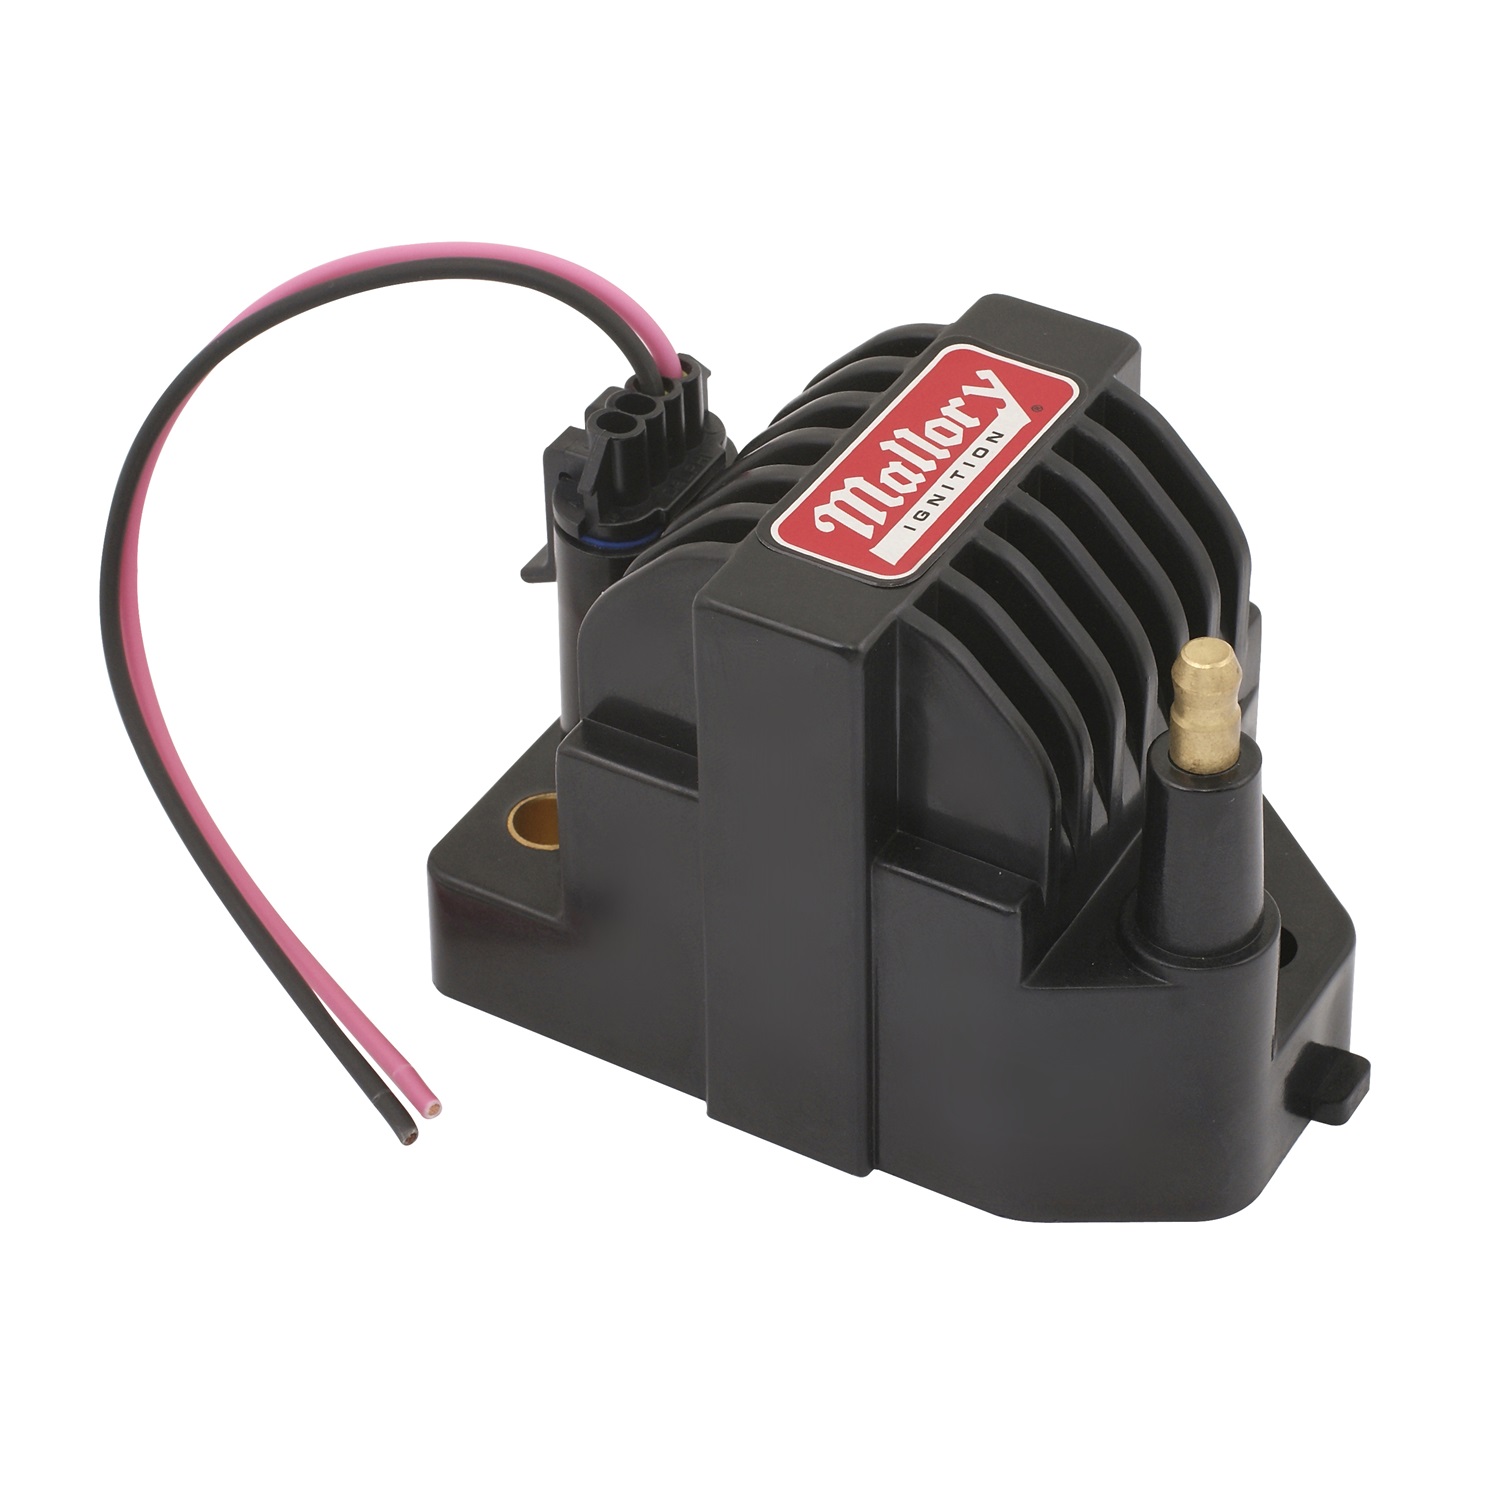 Mallory Mallory 140051 Firestorm Ignition Coil